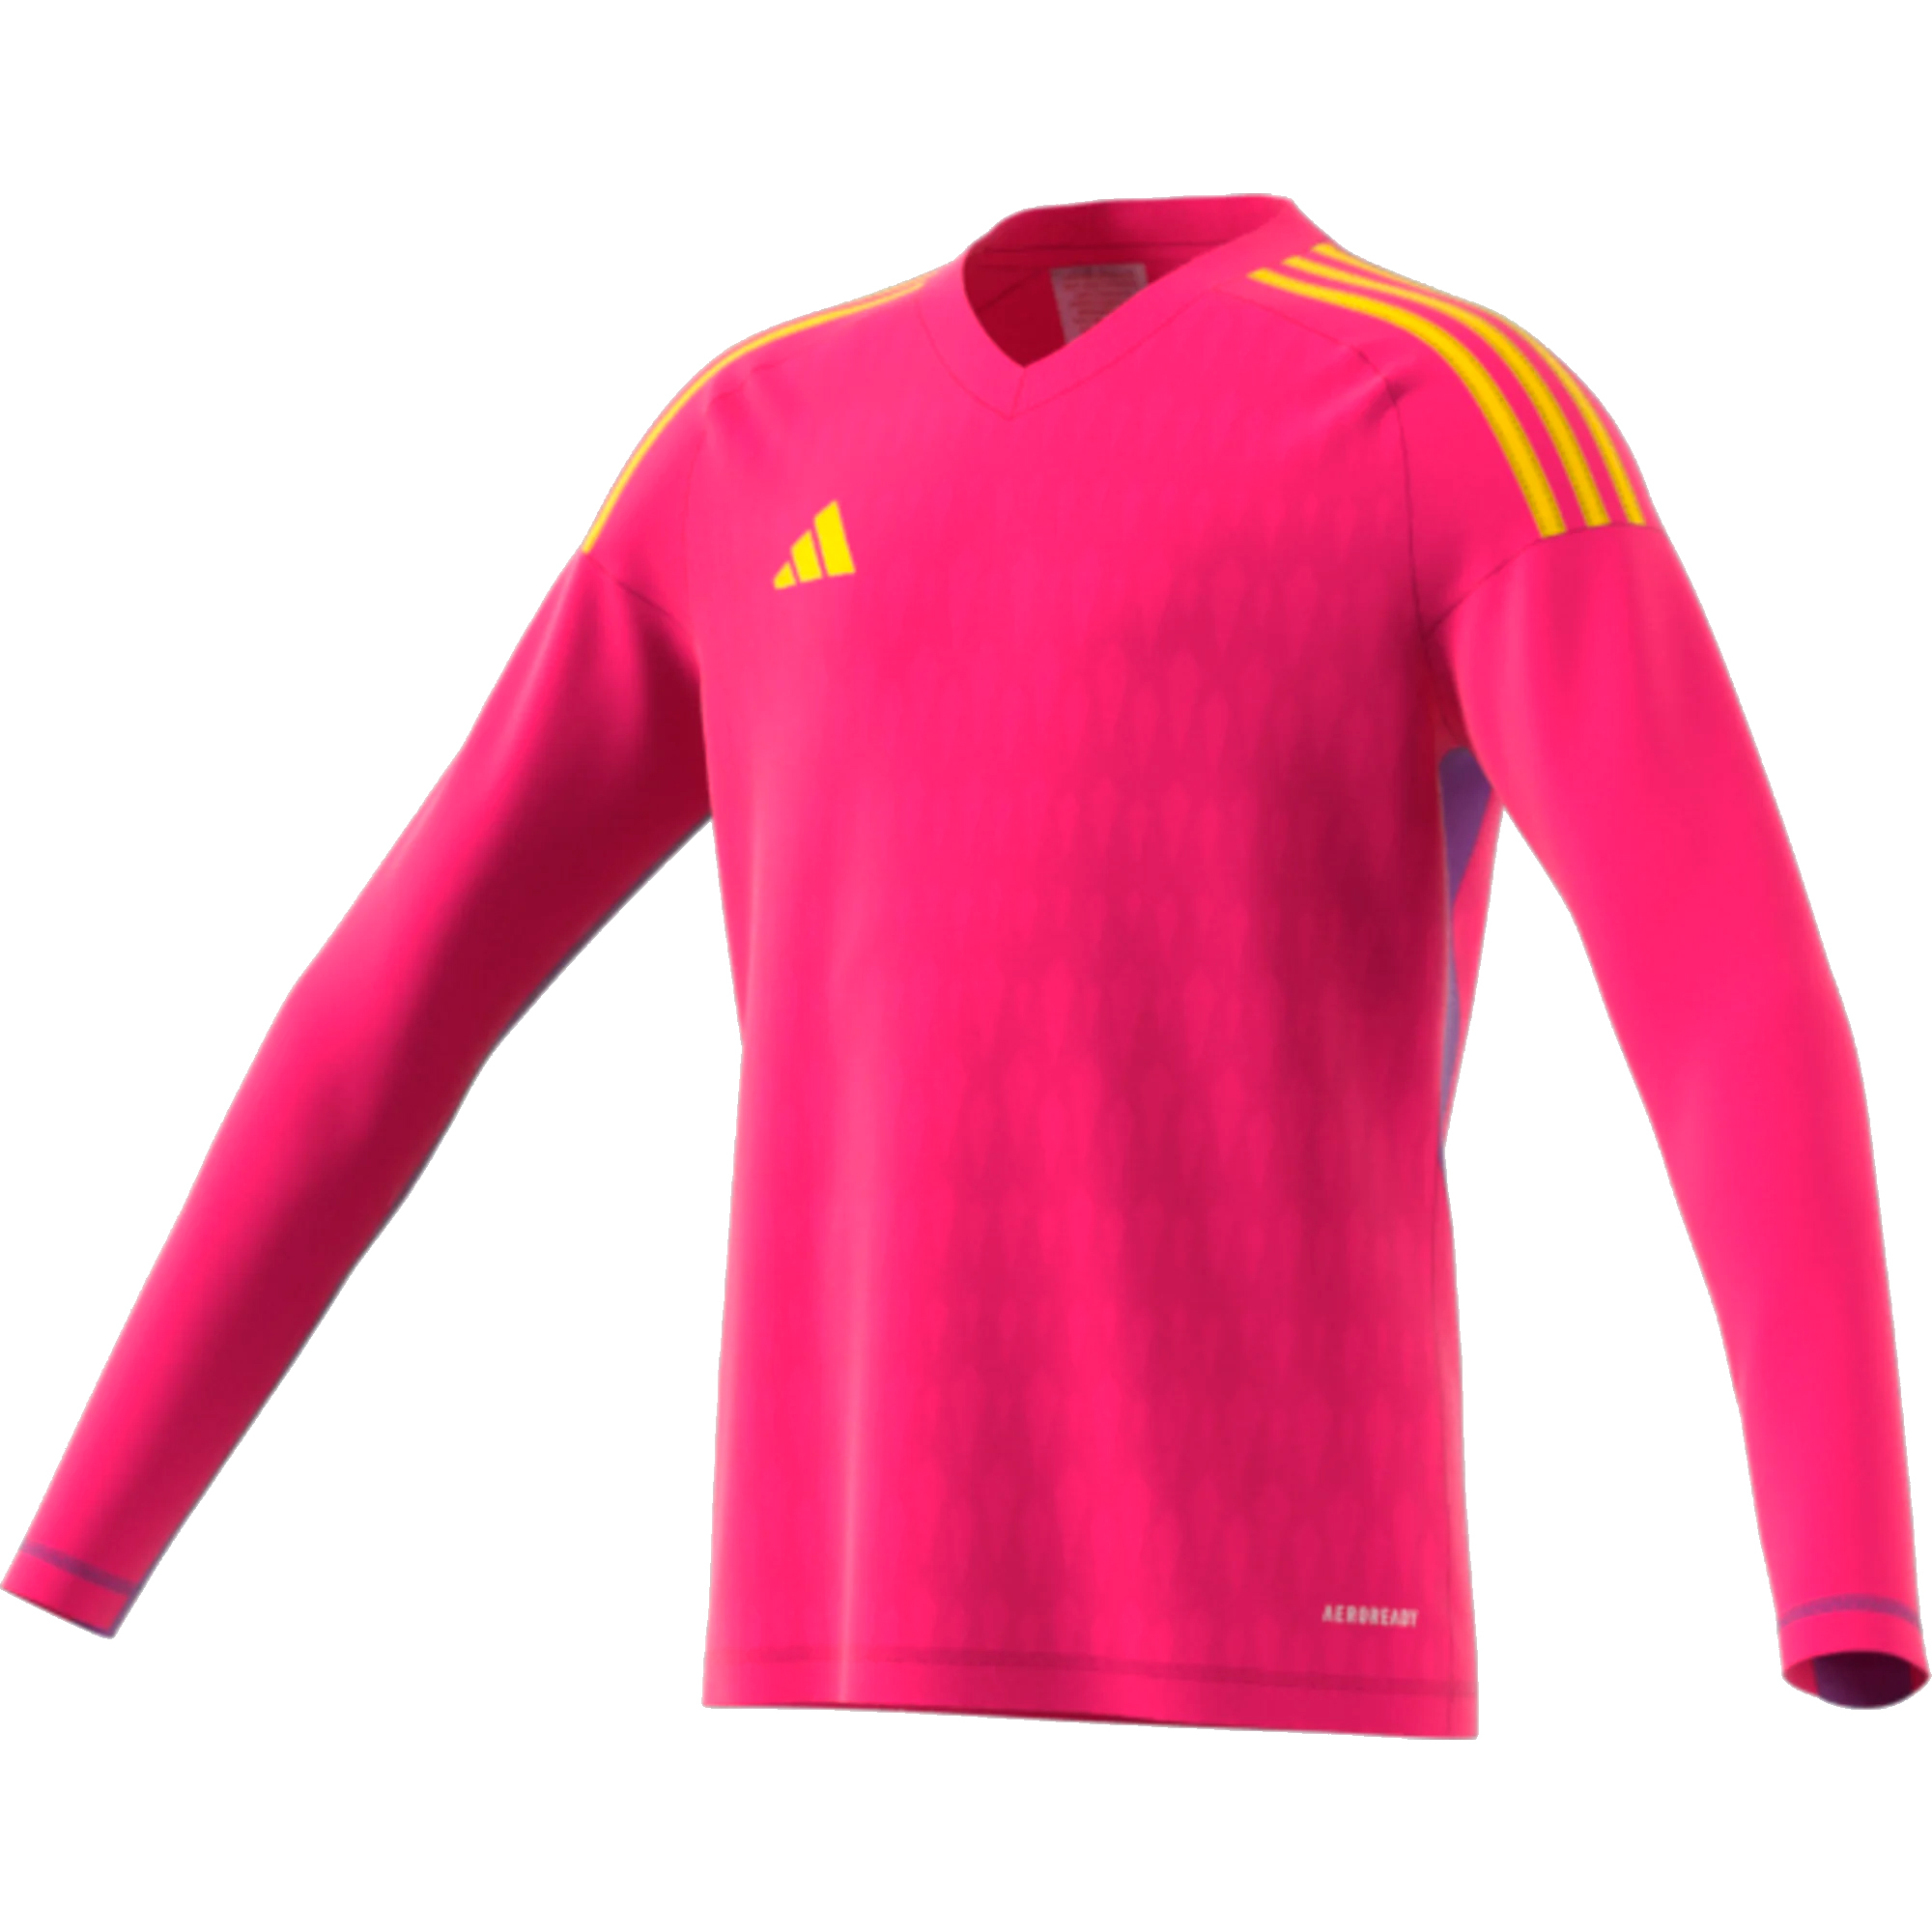 ADIDAS T23 COMPETITION GK JERSEY LS YOUTH TEREMA